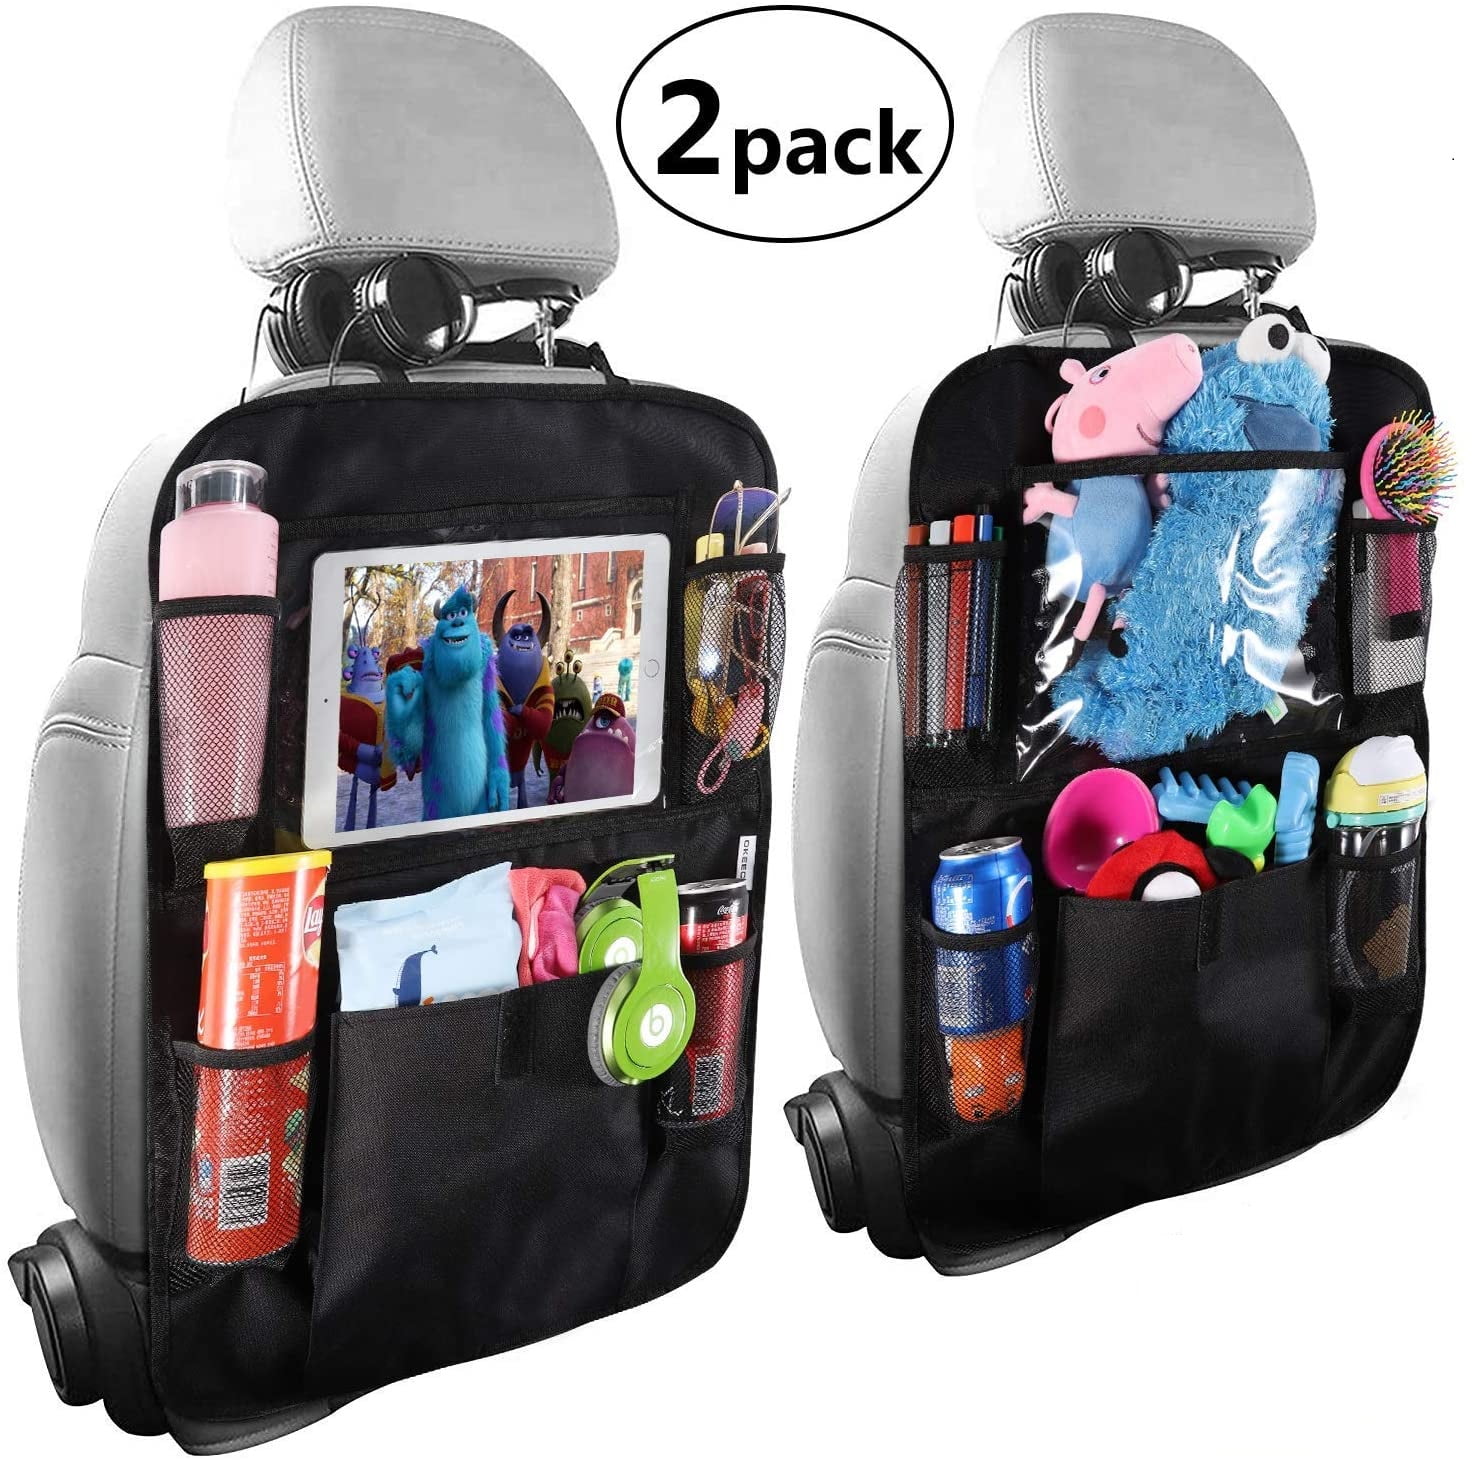 Car Seat Back Organizer for Kids Car Organizer Kick Mats with 10 Touch Screen Tablet Holder 11 Storage Pockets Car Back Seat Protectors Backseat Child Kick Guard Seat Saver 21” x 17”inch 